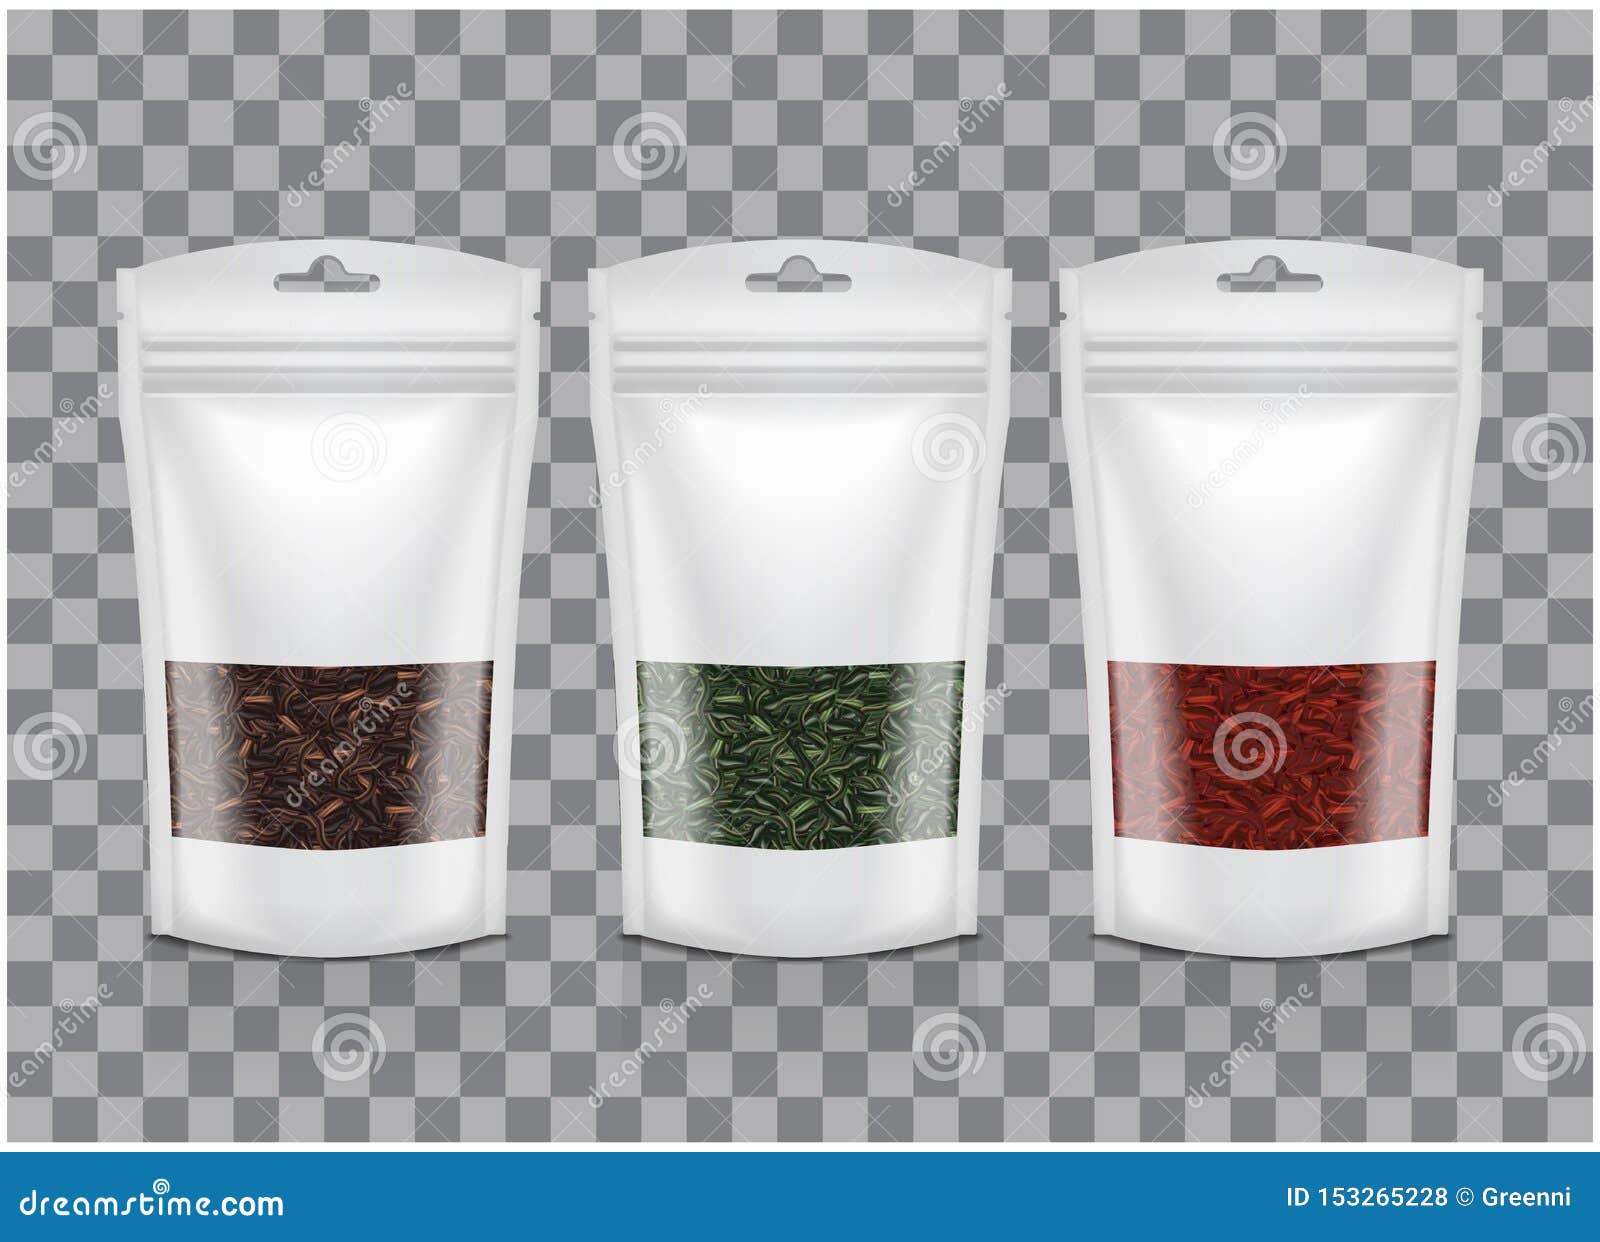 Download White Plastic Bag With Window. Black, Green, Red Tea. Packaging Template Mockup Collection Stock ...